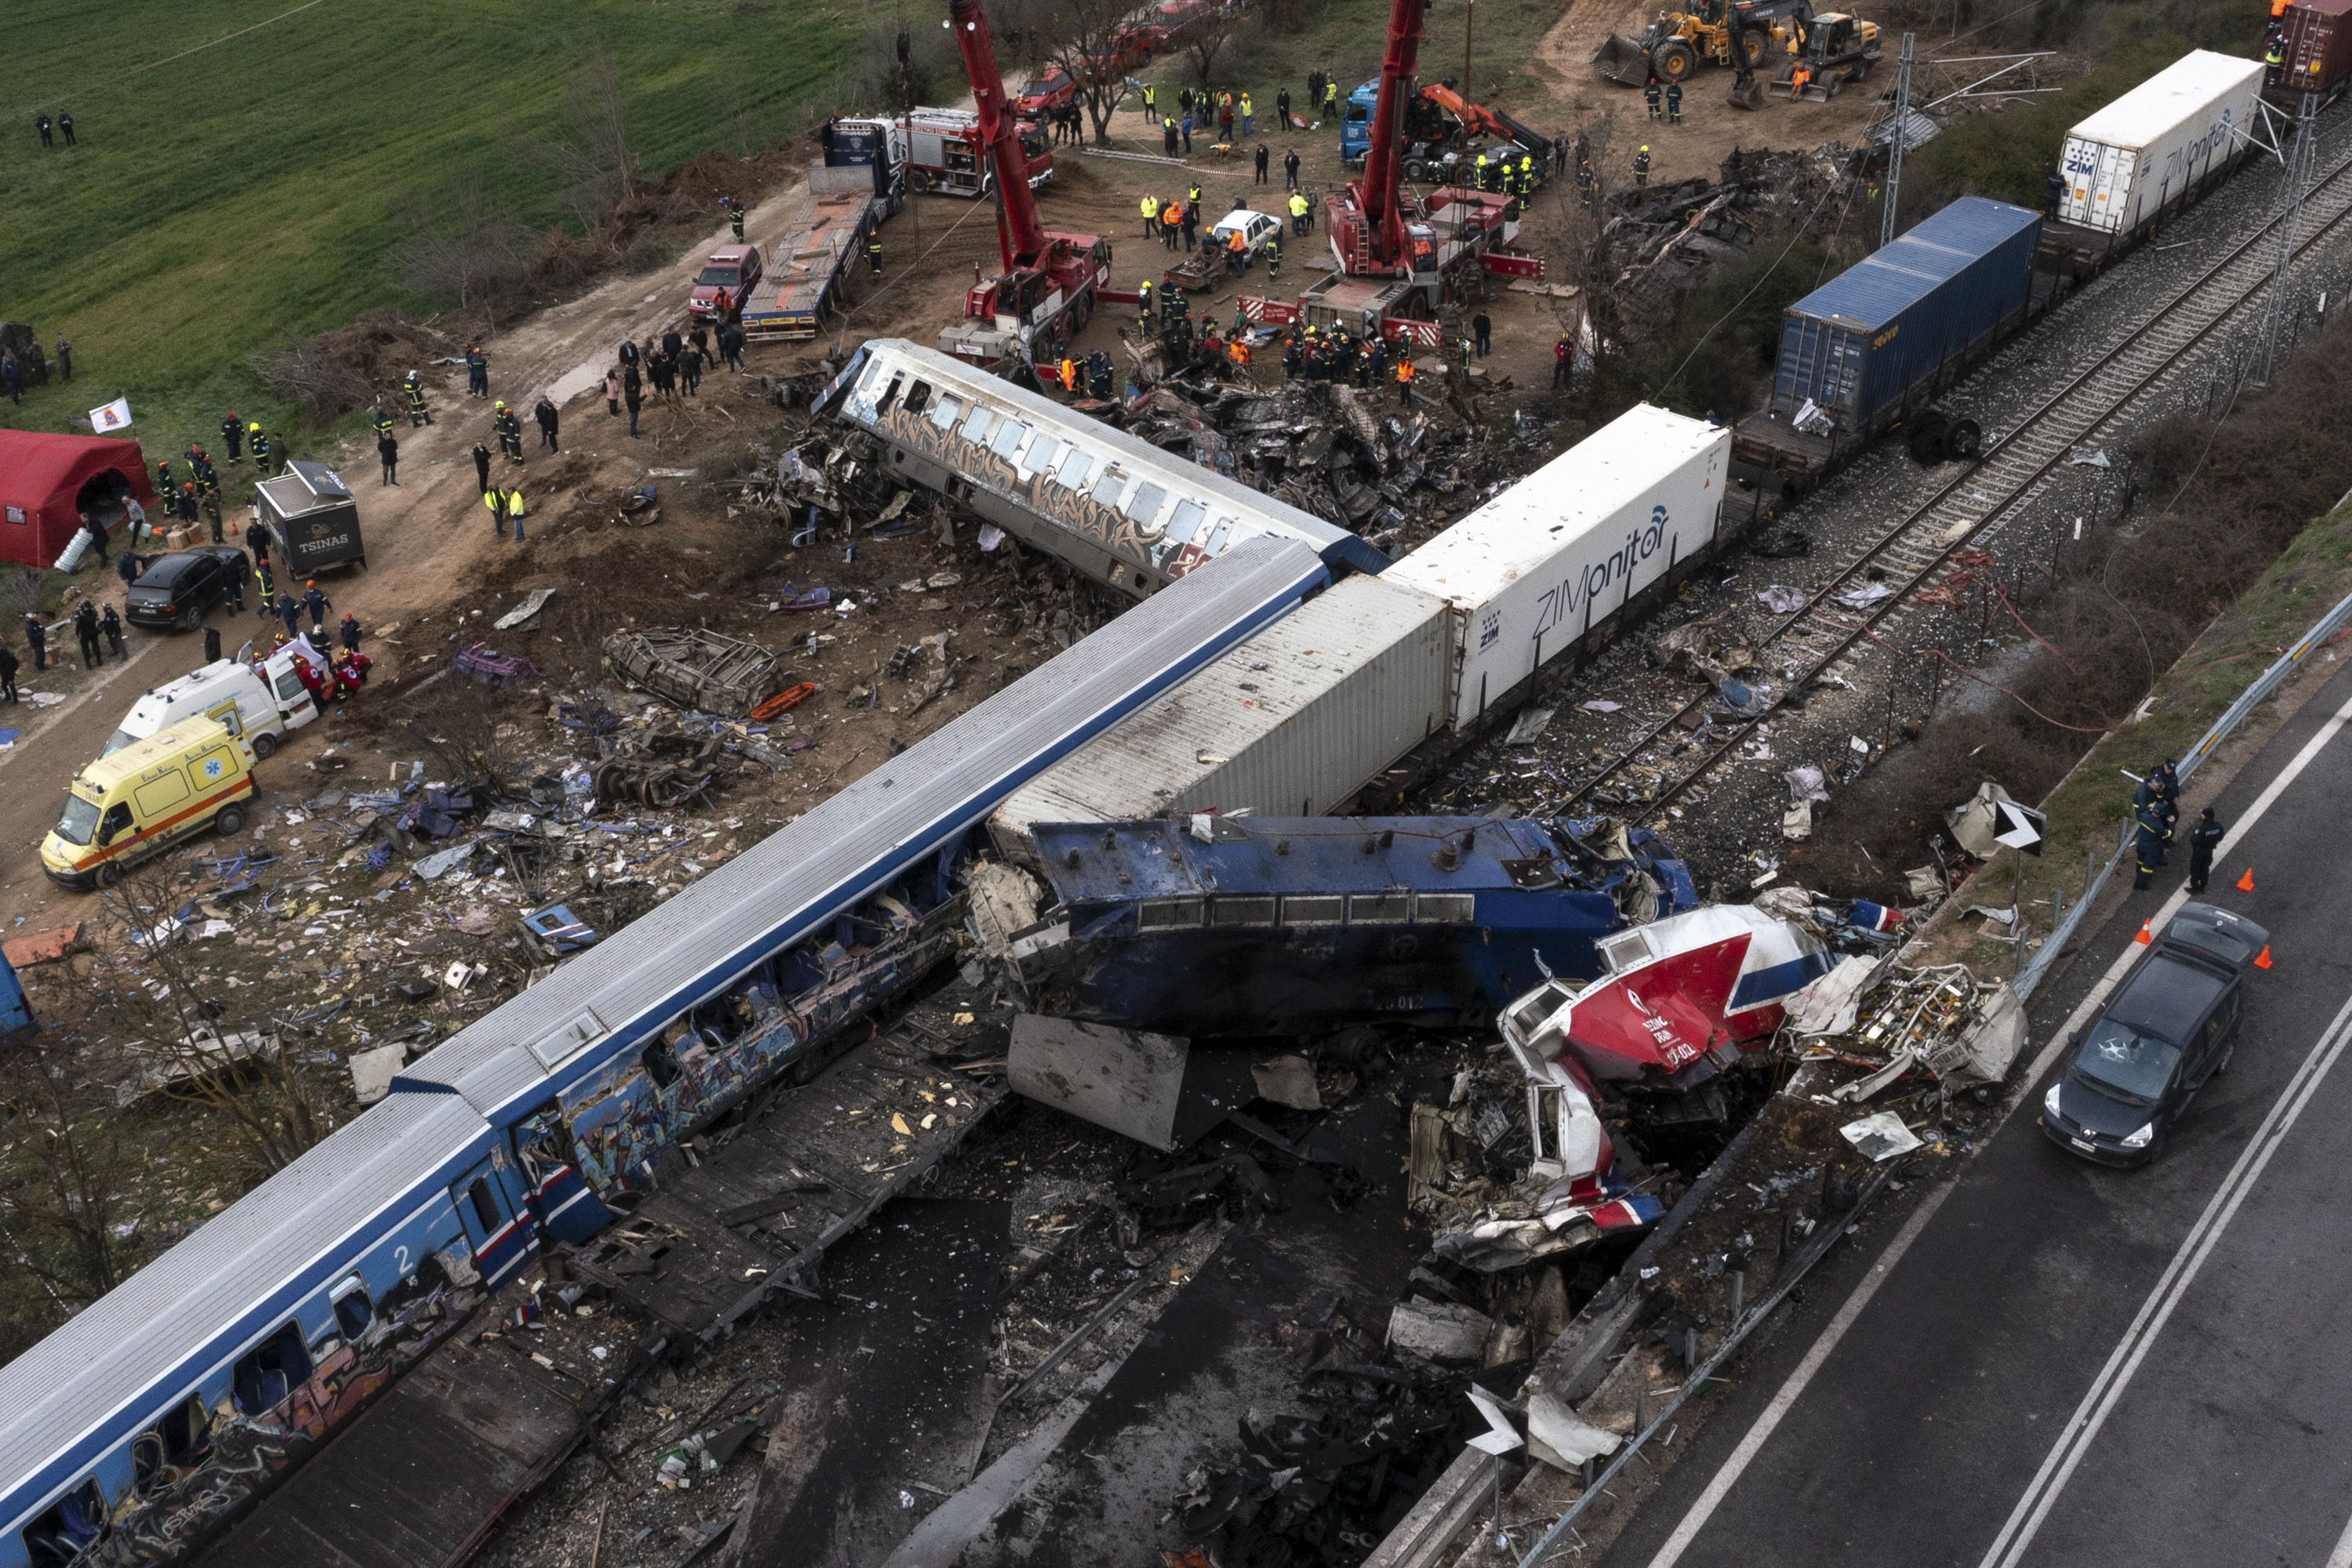 Emergency responders work at the site where a passenger train and freight train collided head-on in Tempi, central Greece, near the city of Larissa.